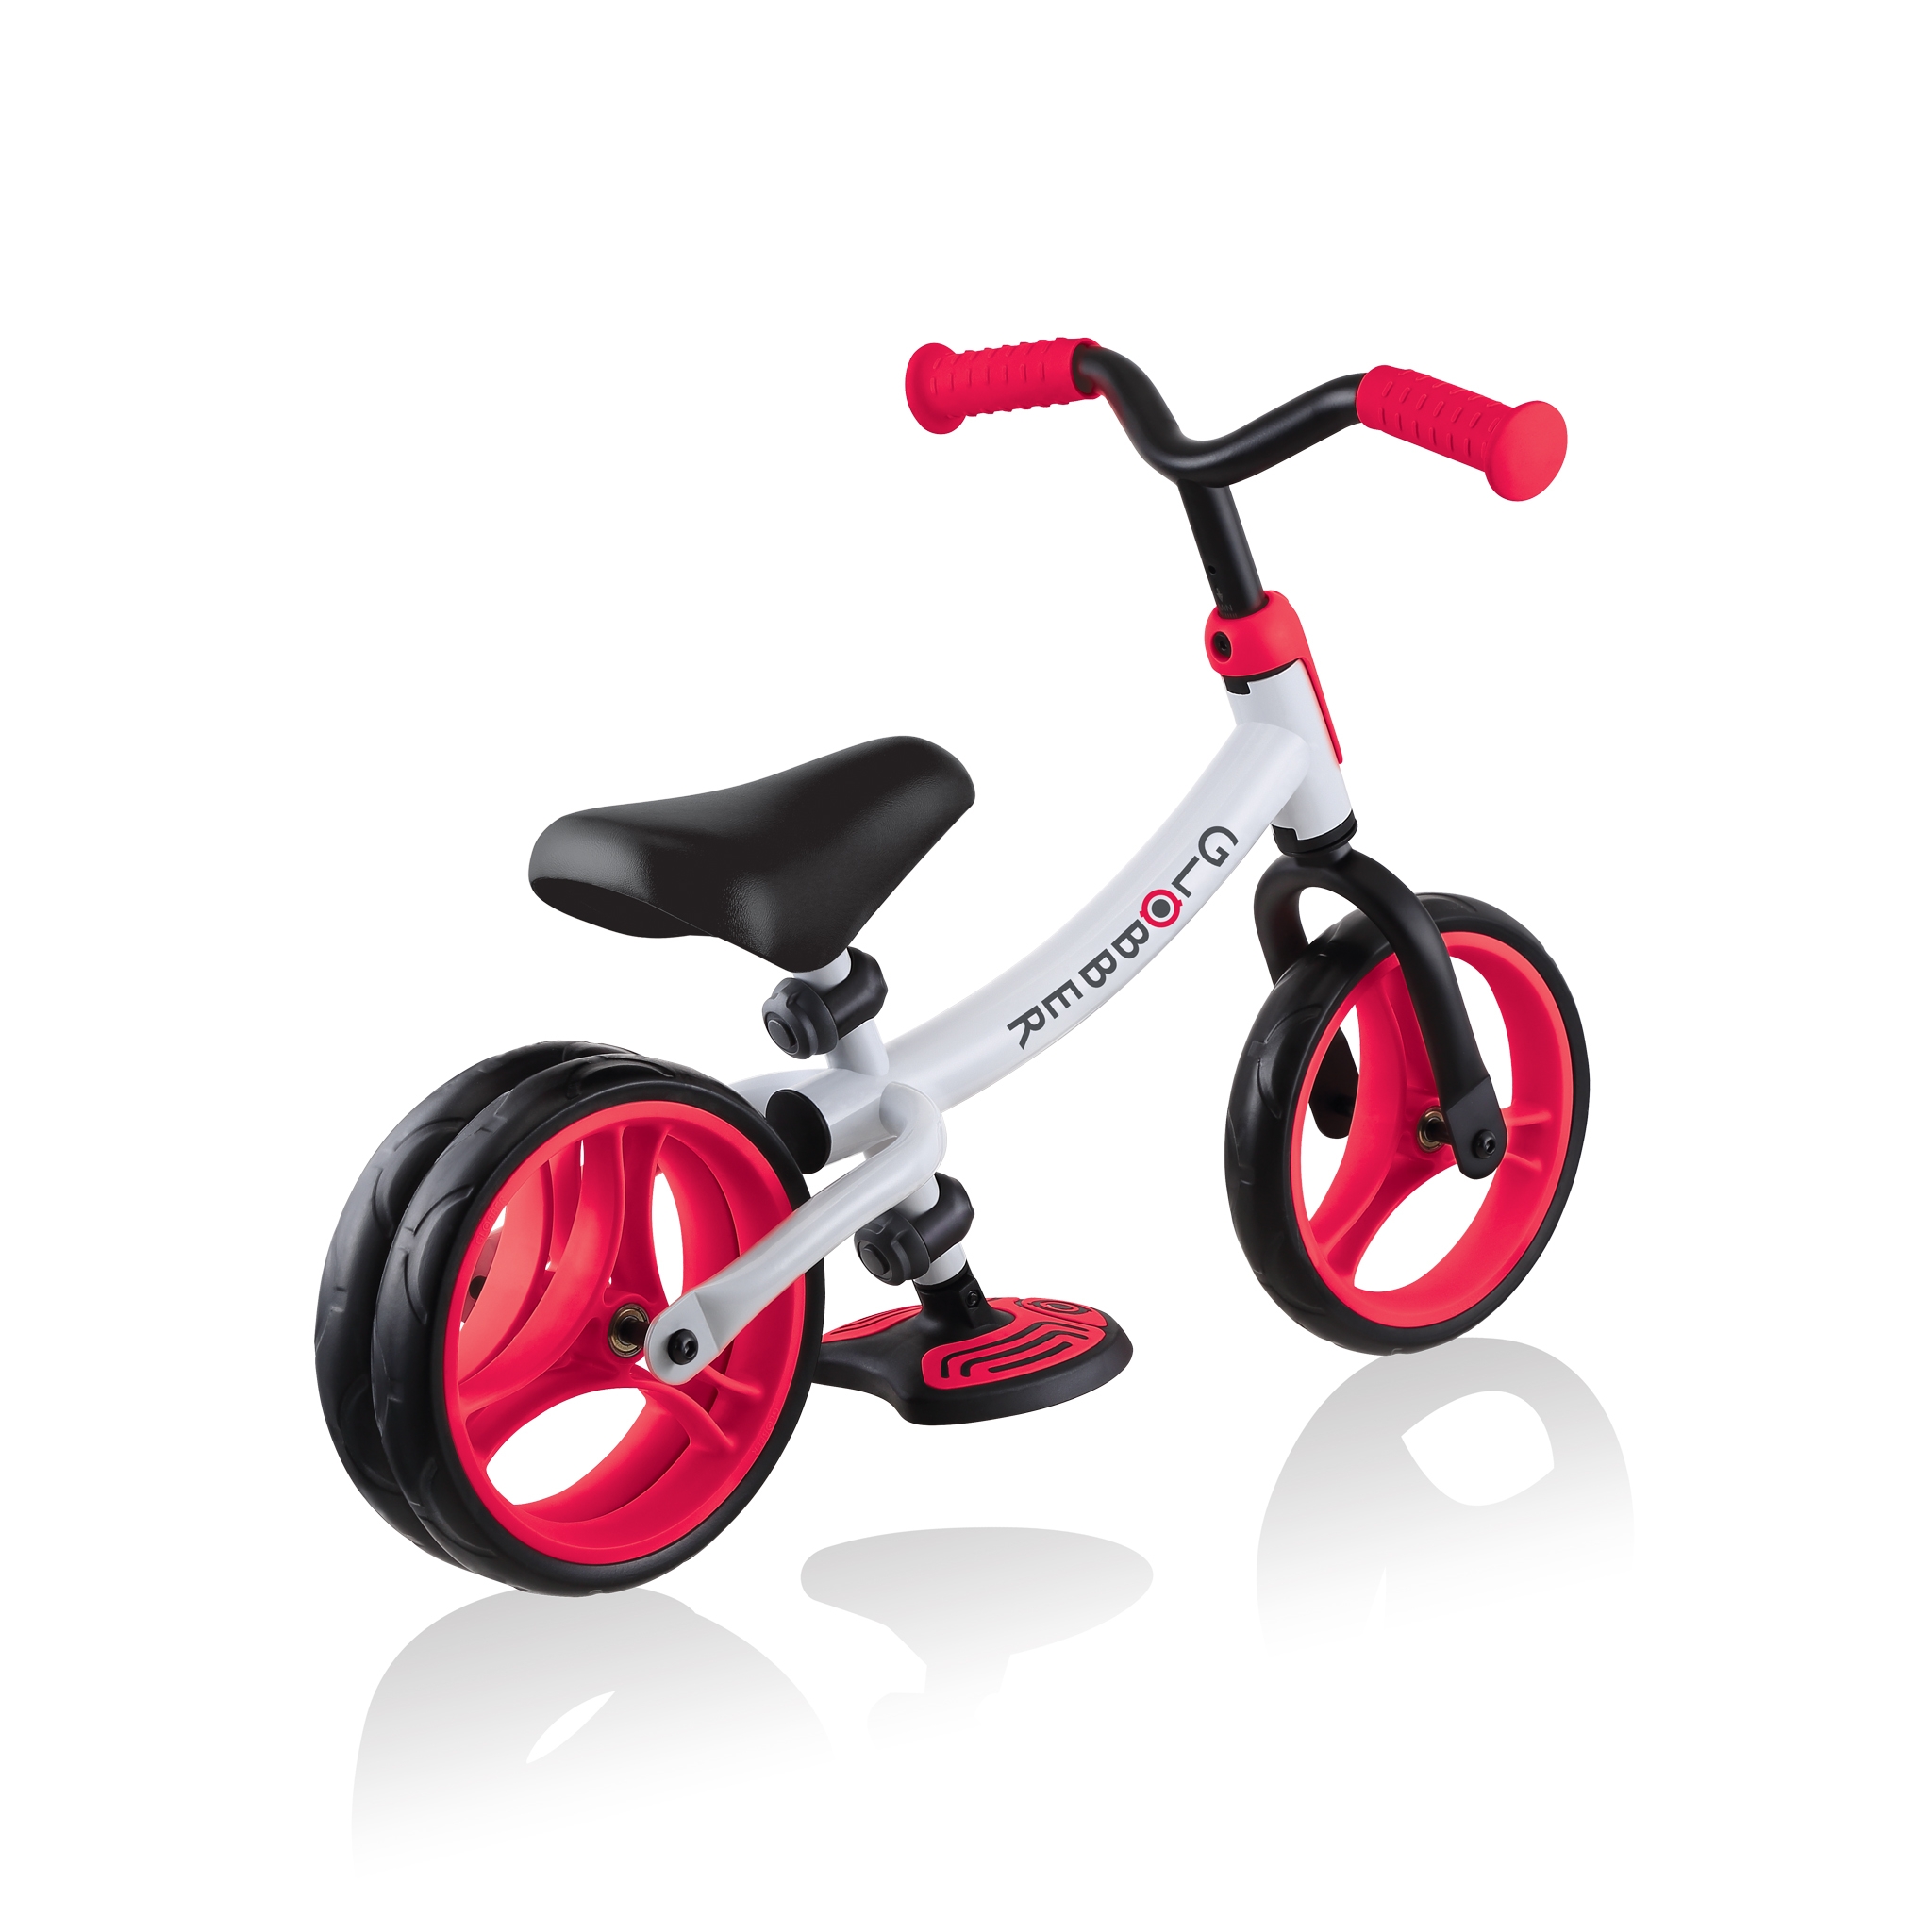 GO-BIKE-DUO-black-balance-bikes-for-toddlers-with-robust-steel-frame 3